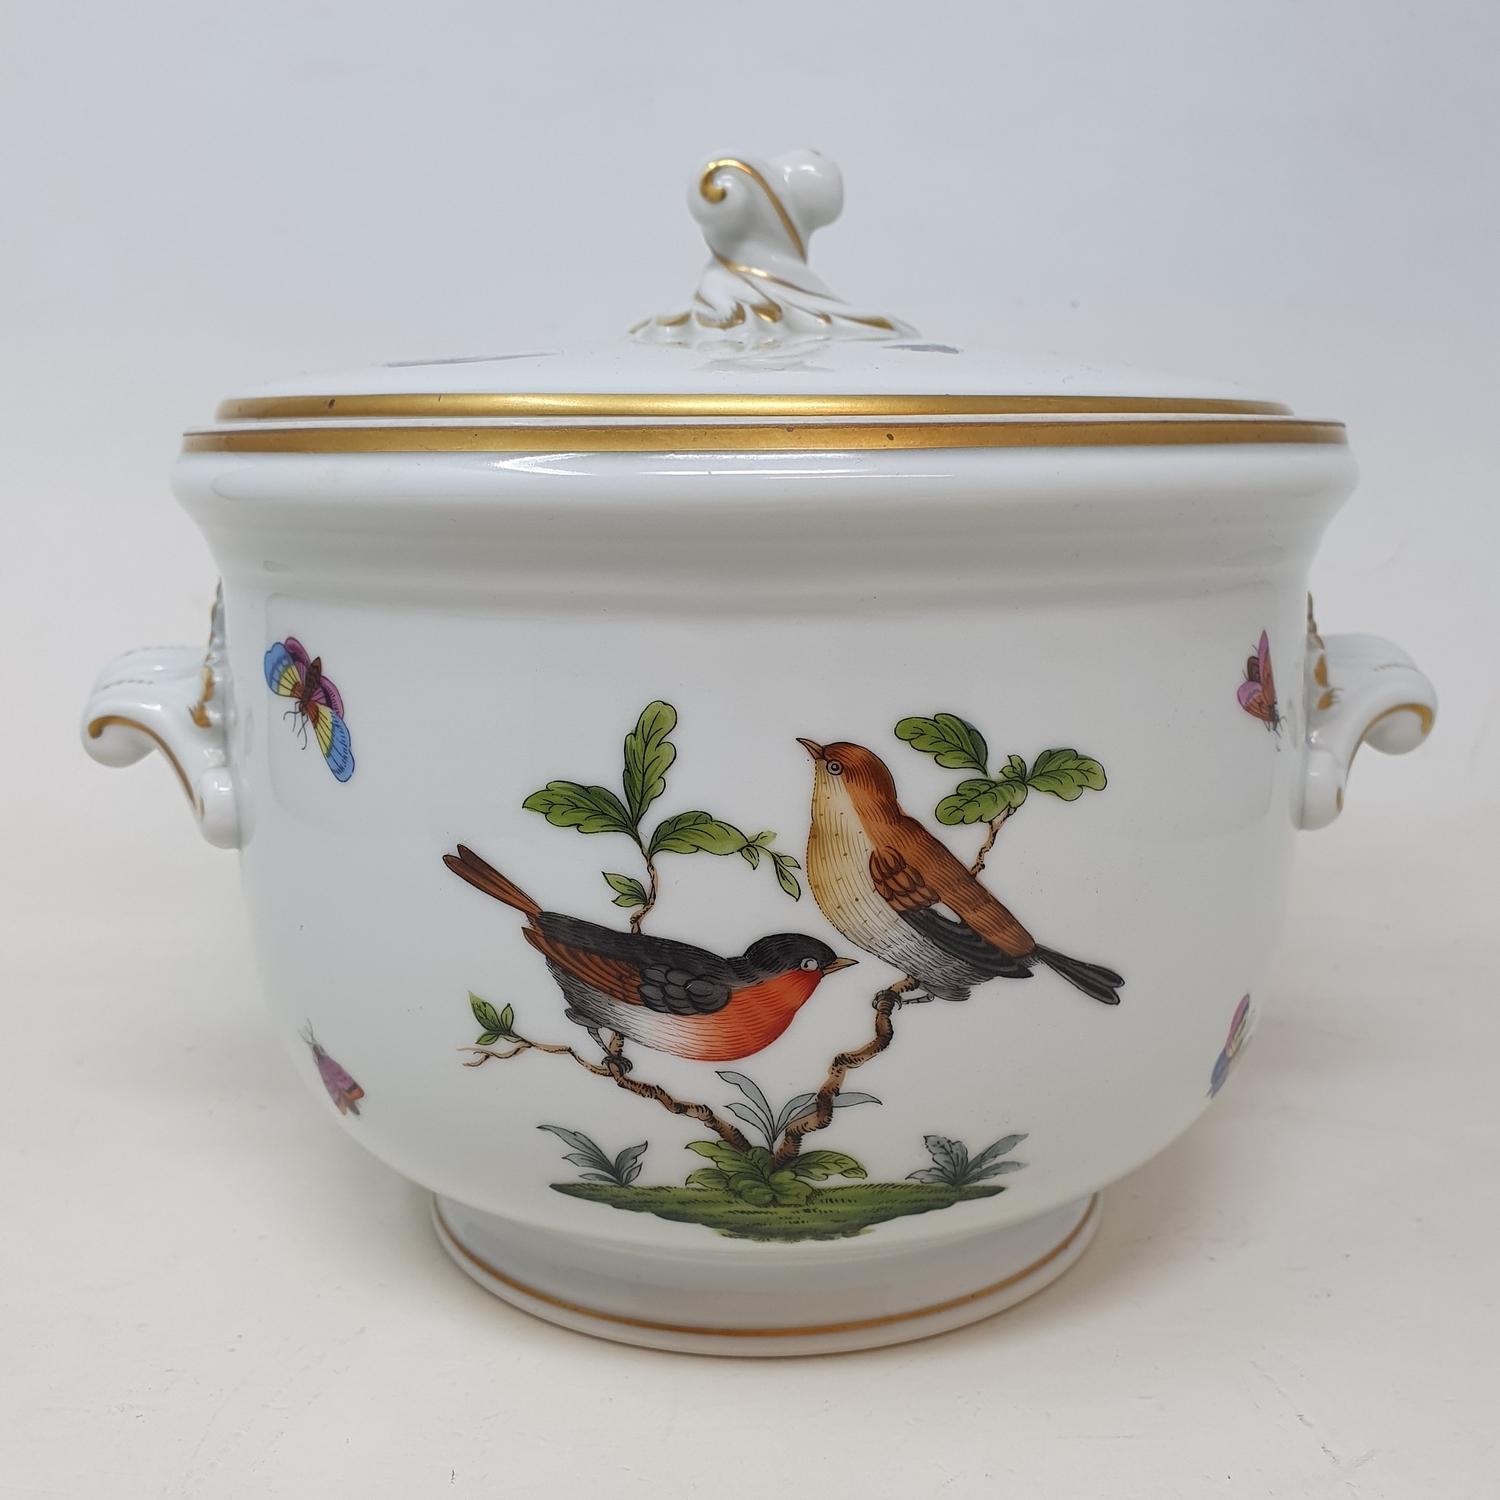 A Herend ice bucket and cover, decorated birds and butterflies, 20 cm diameter